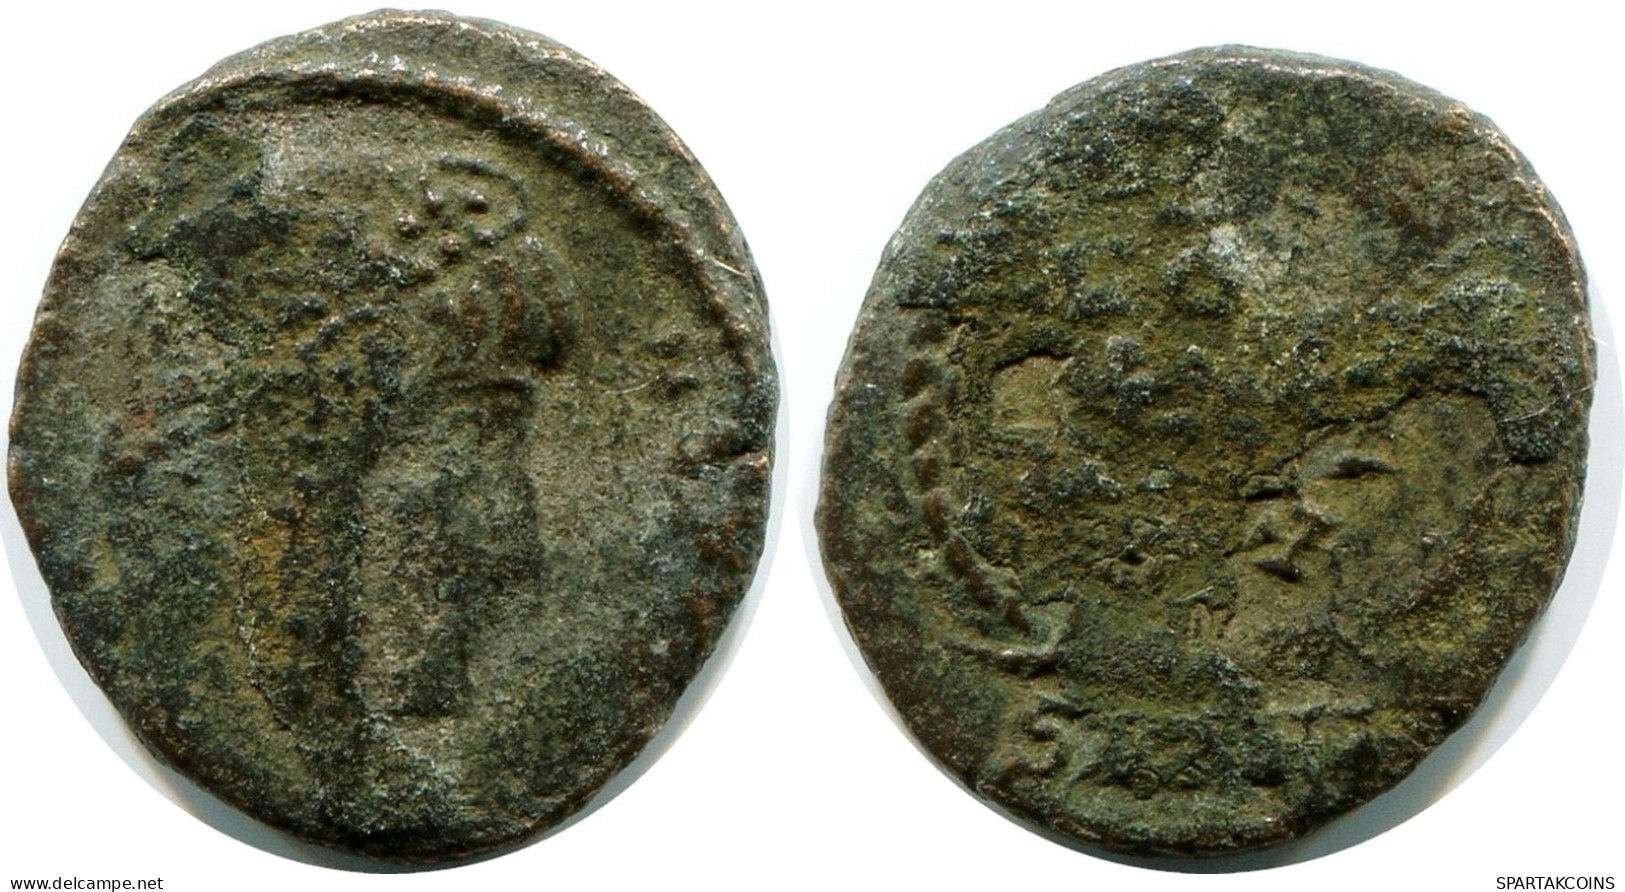 CONSTANS MINTED IN ANTIOCH FOUND IN IHNASYAH HOARD EGYPT #ANC11811.14.E.A - The Christian Empire (307 AD Tot 363 AD)